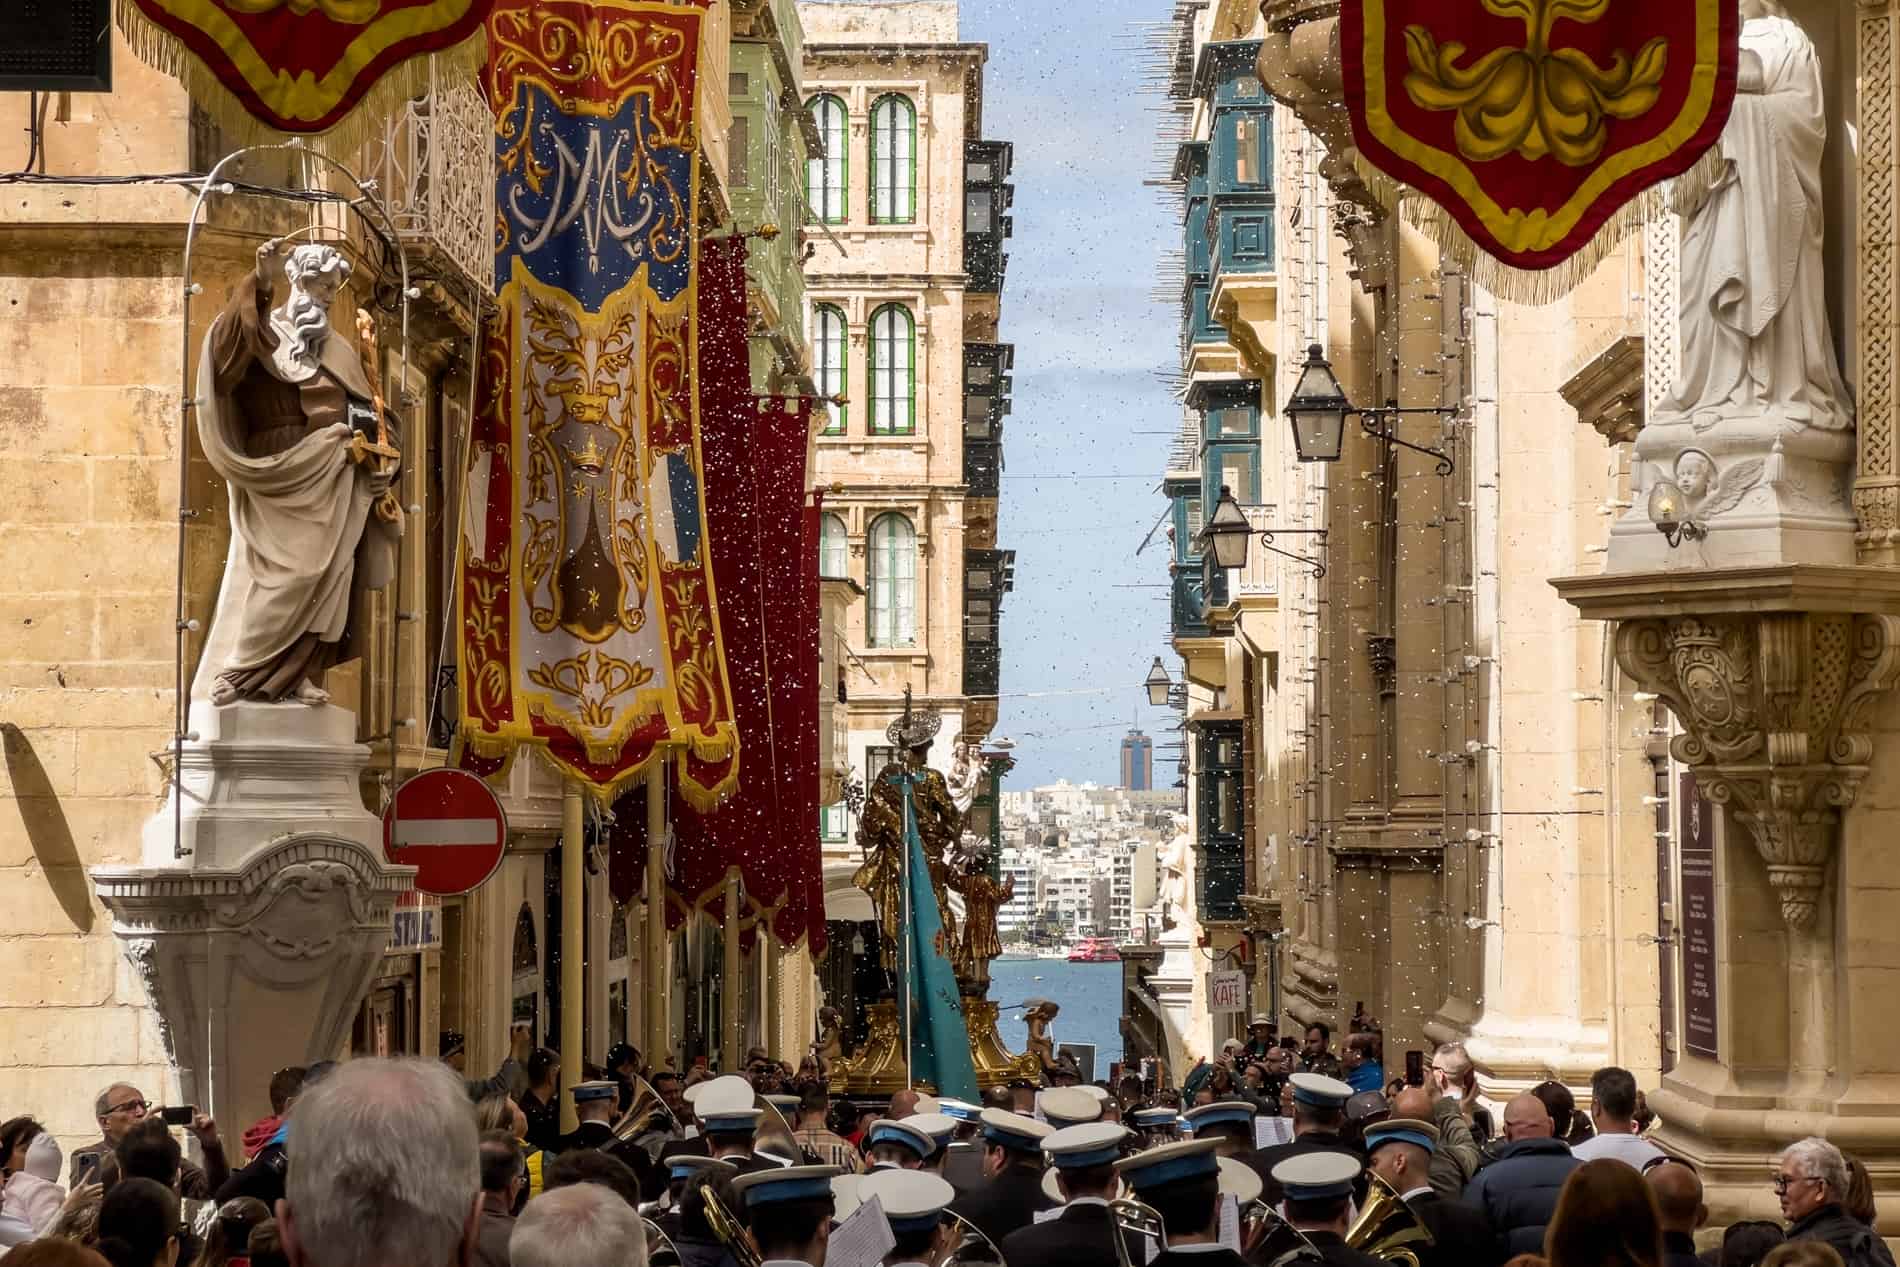 People follow a band performing in a street in Valletta, Malta. Red, gold and blue flags hang from the buildings. 